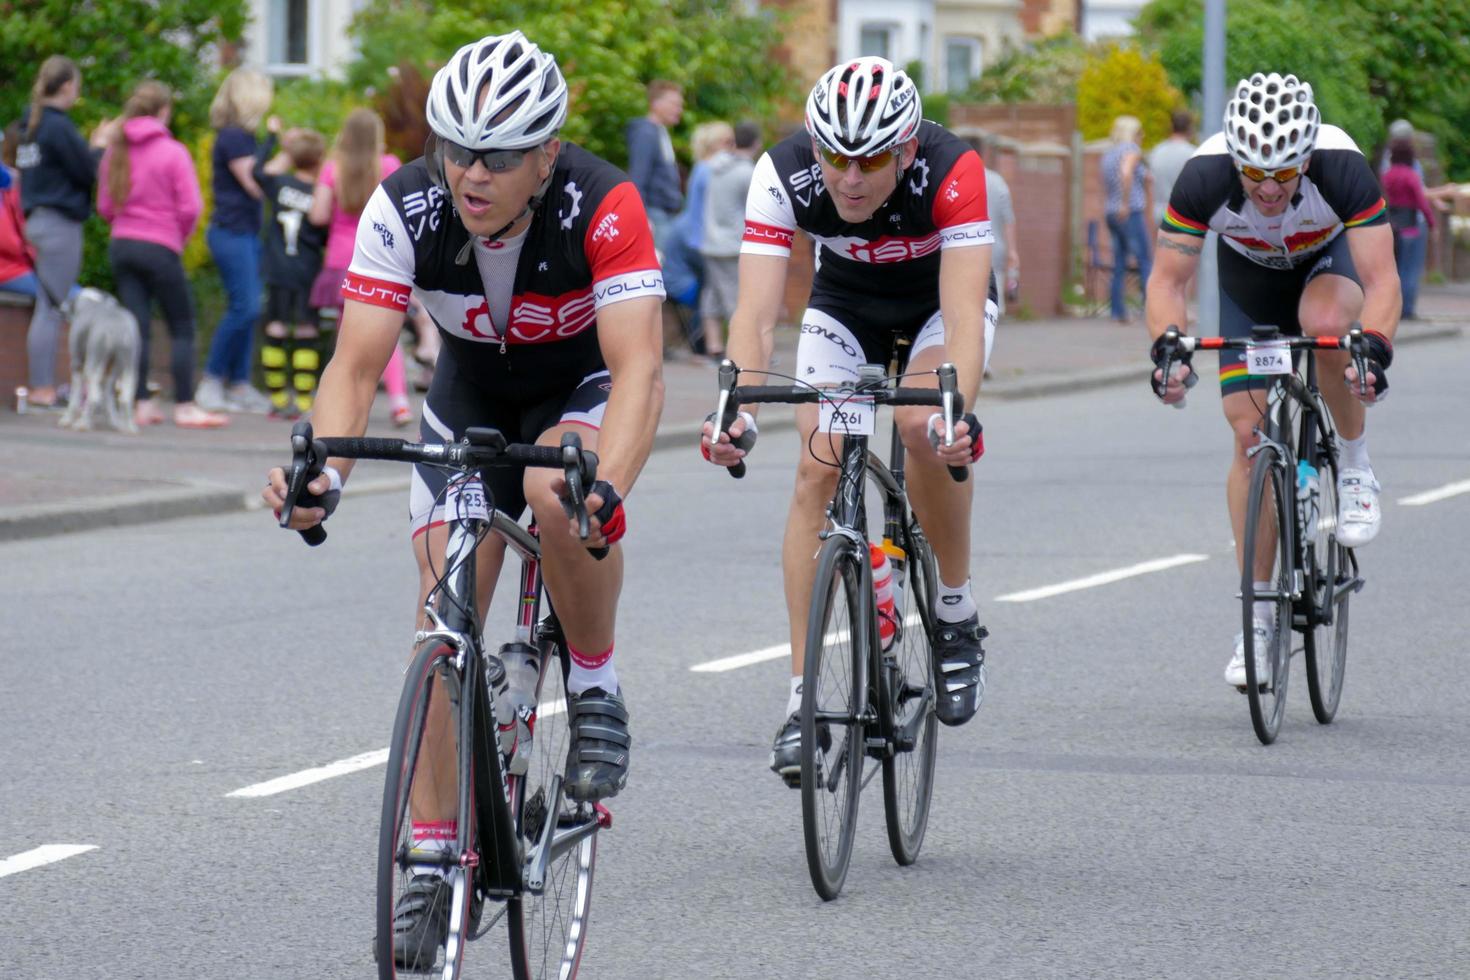 Cardiff, Wales, UK, 2015. Cyclists in the Velothon Cycling Event photo